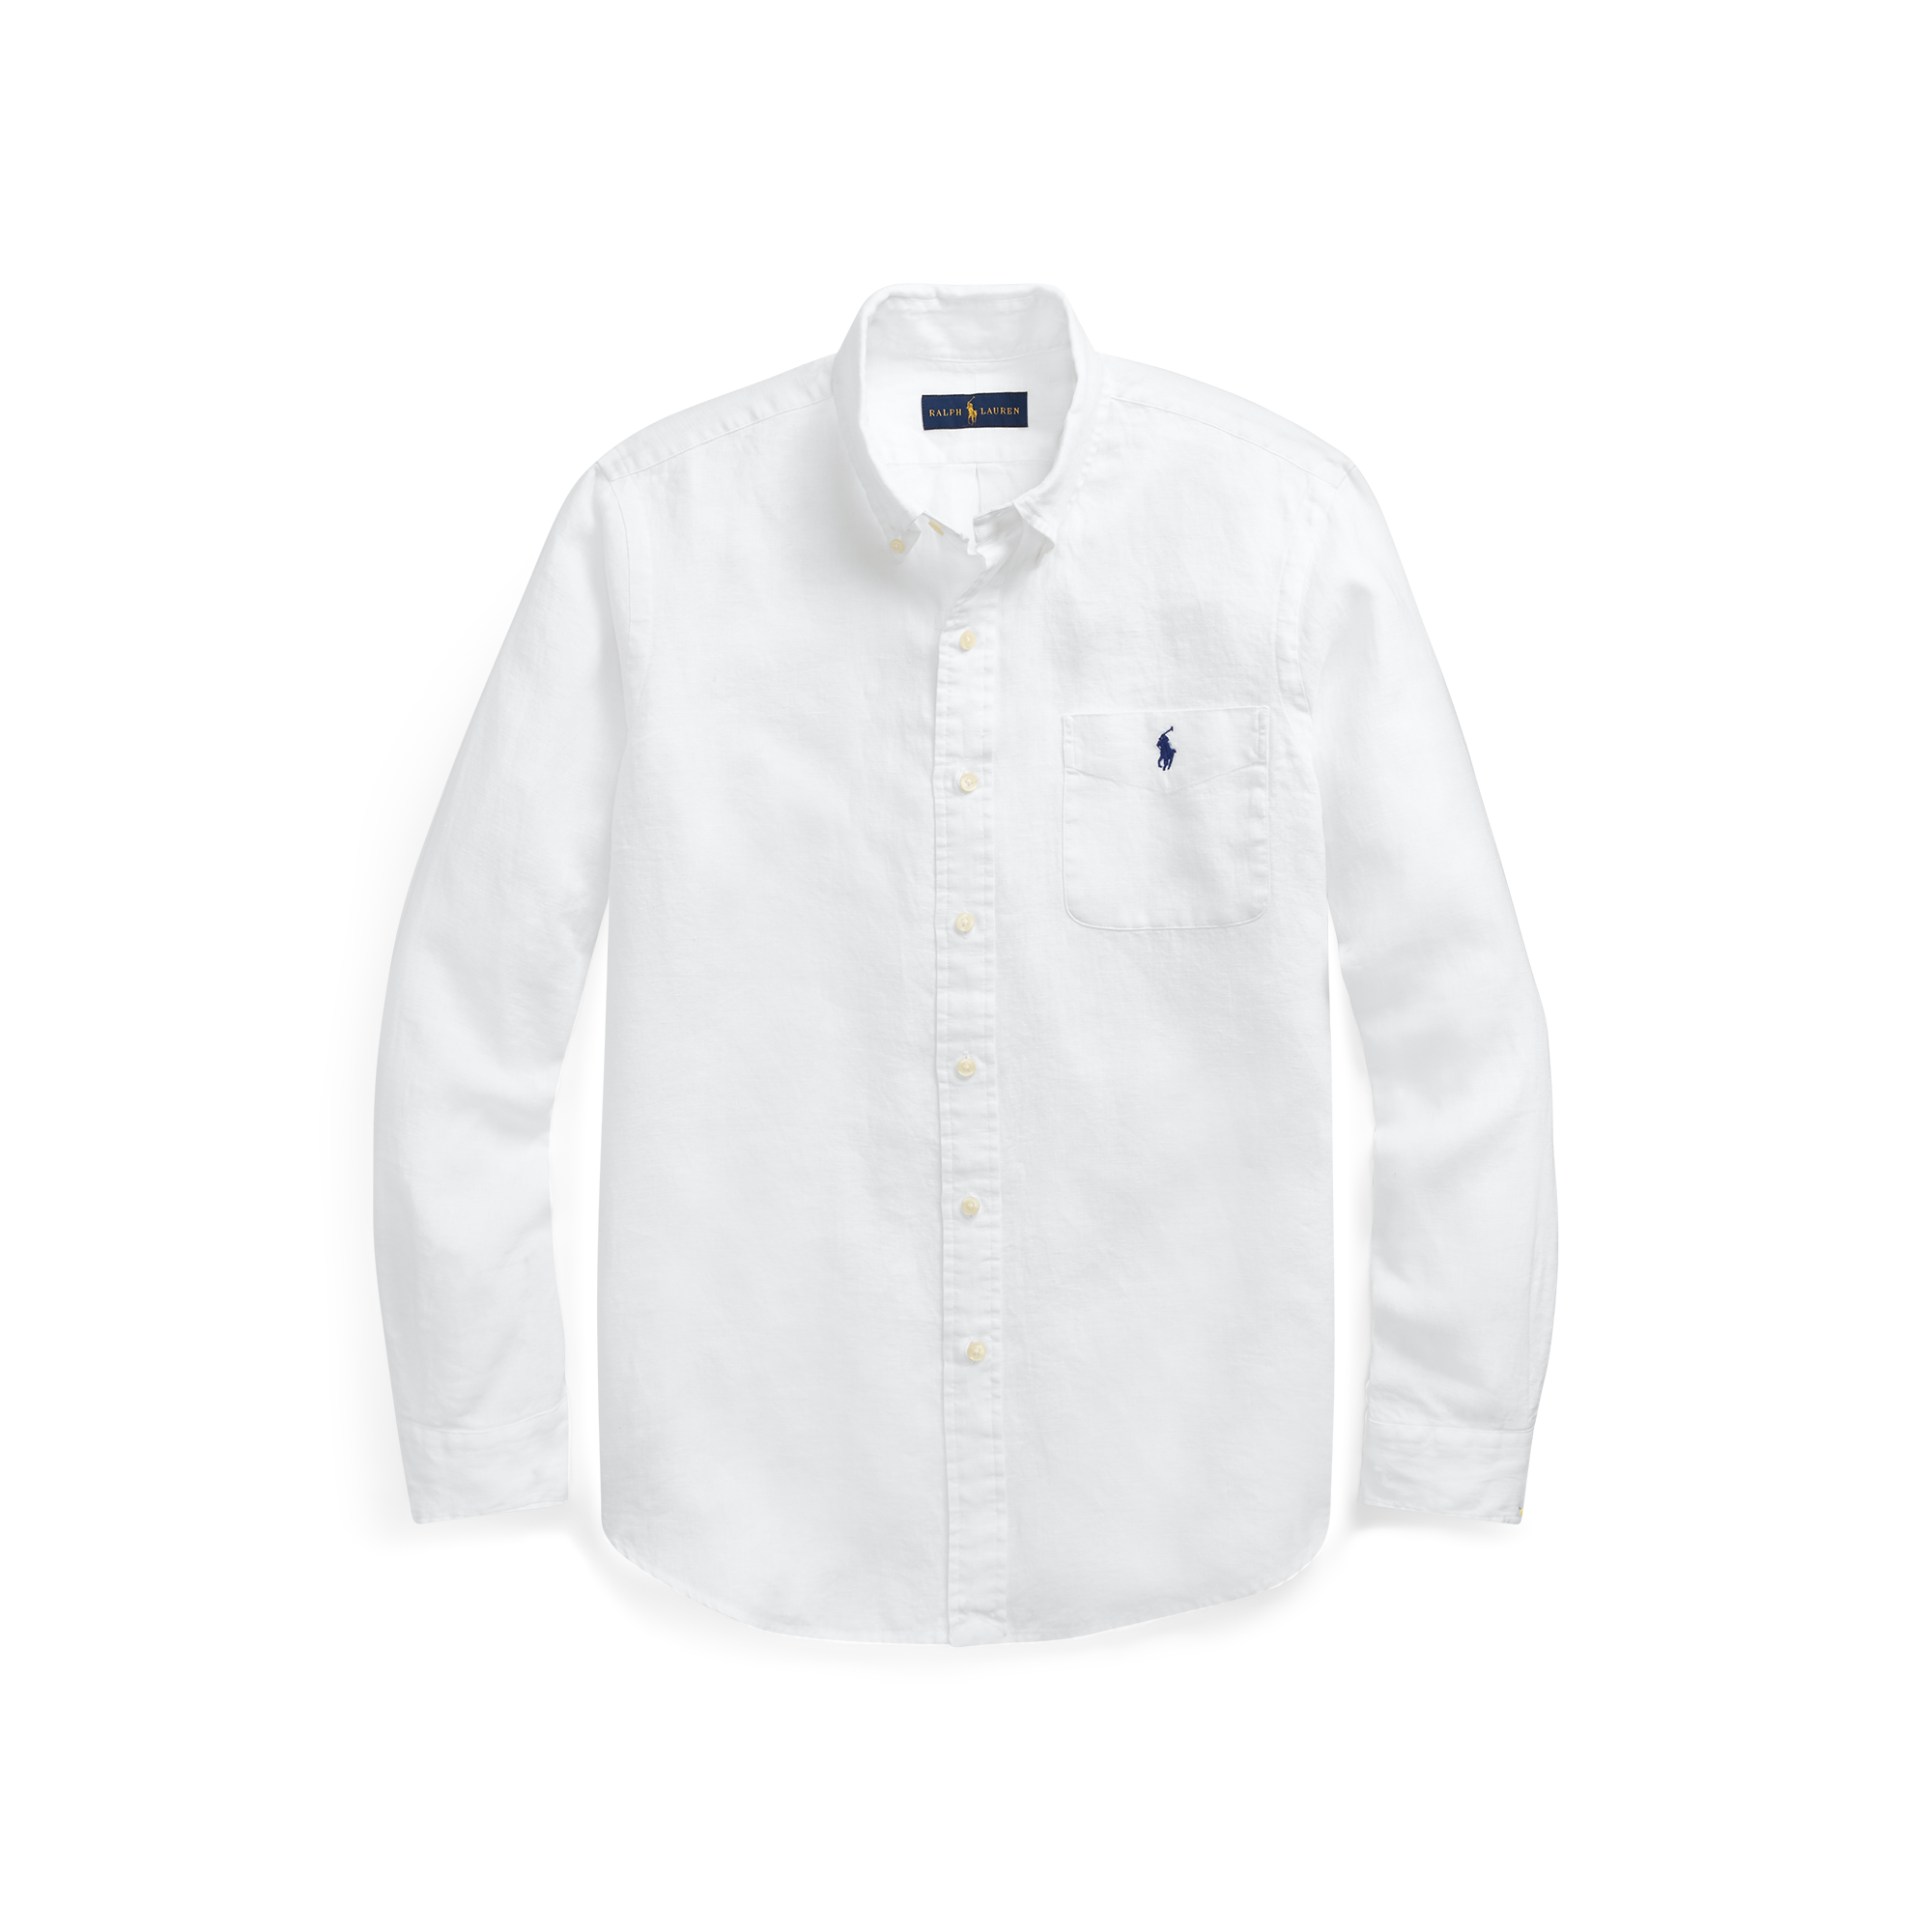 A classic button-down is a must-have